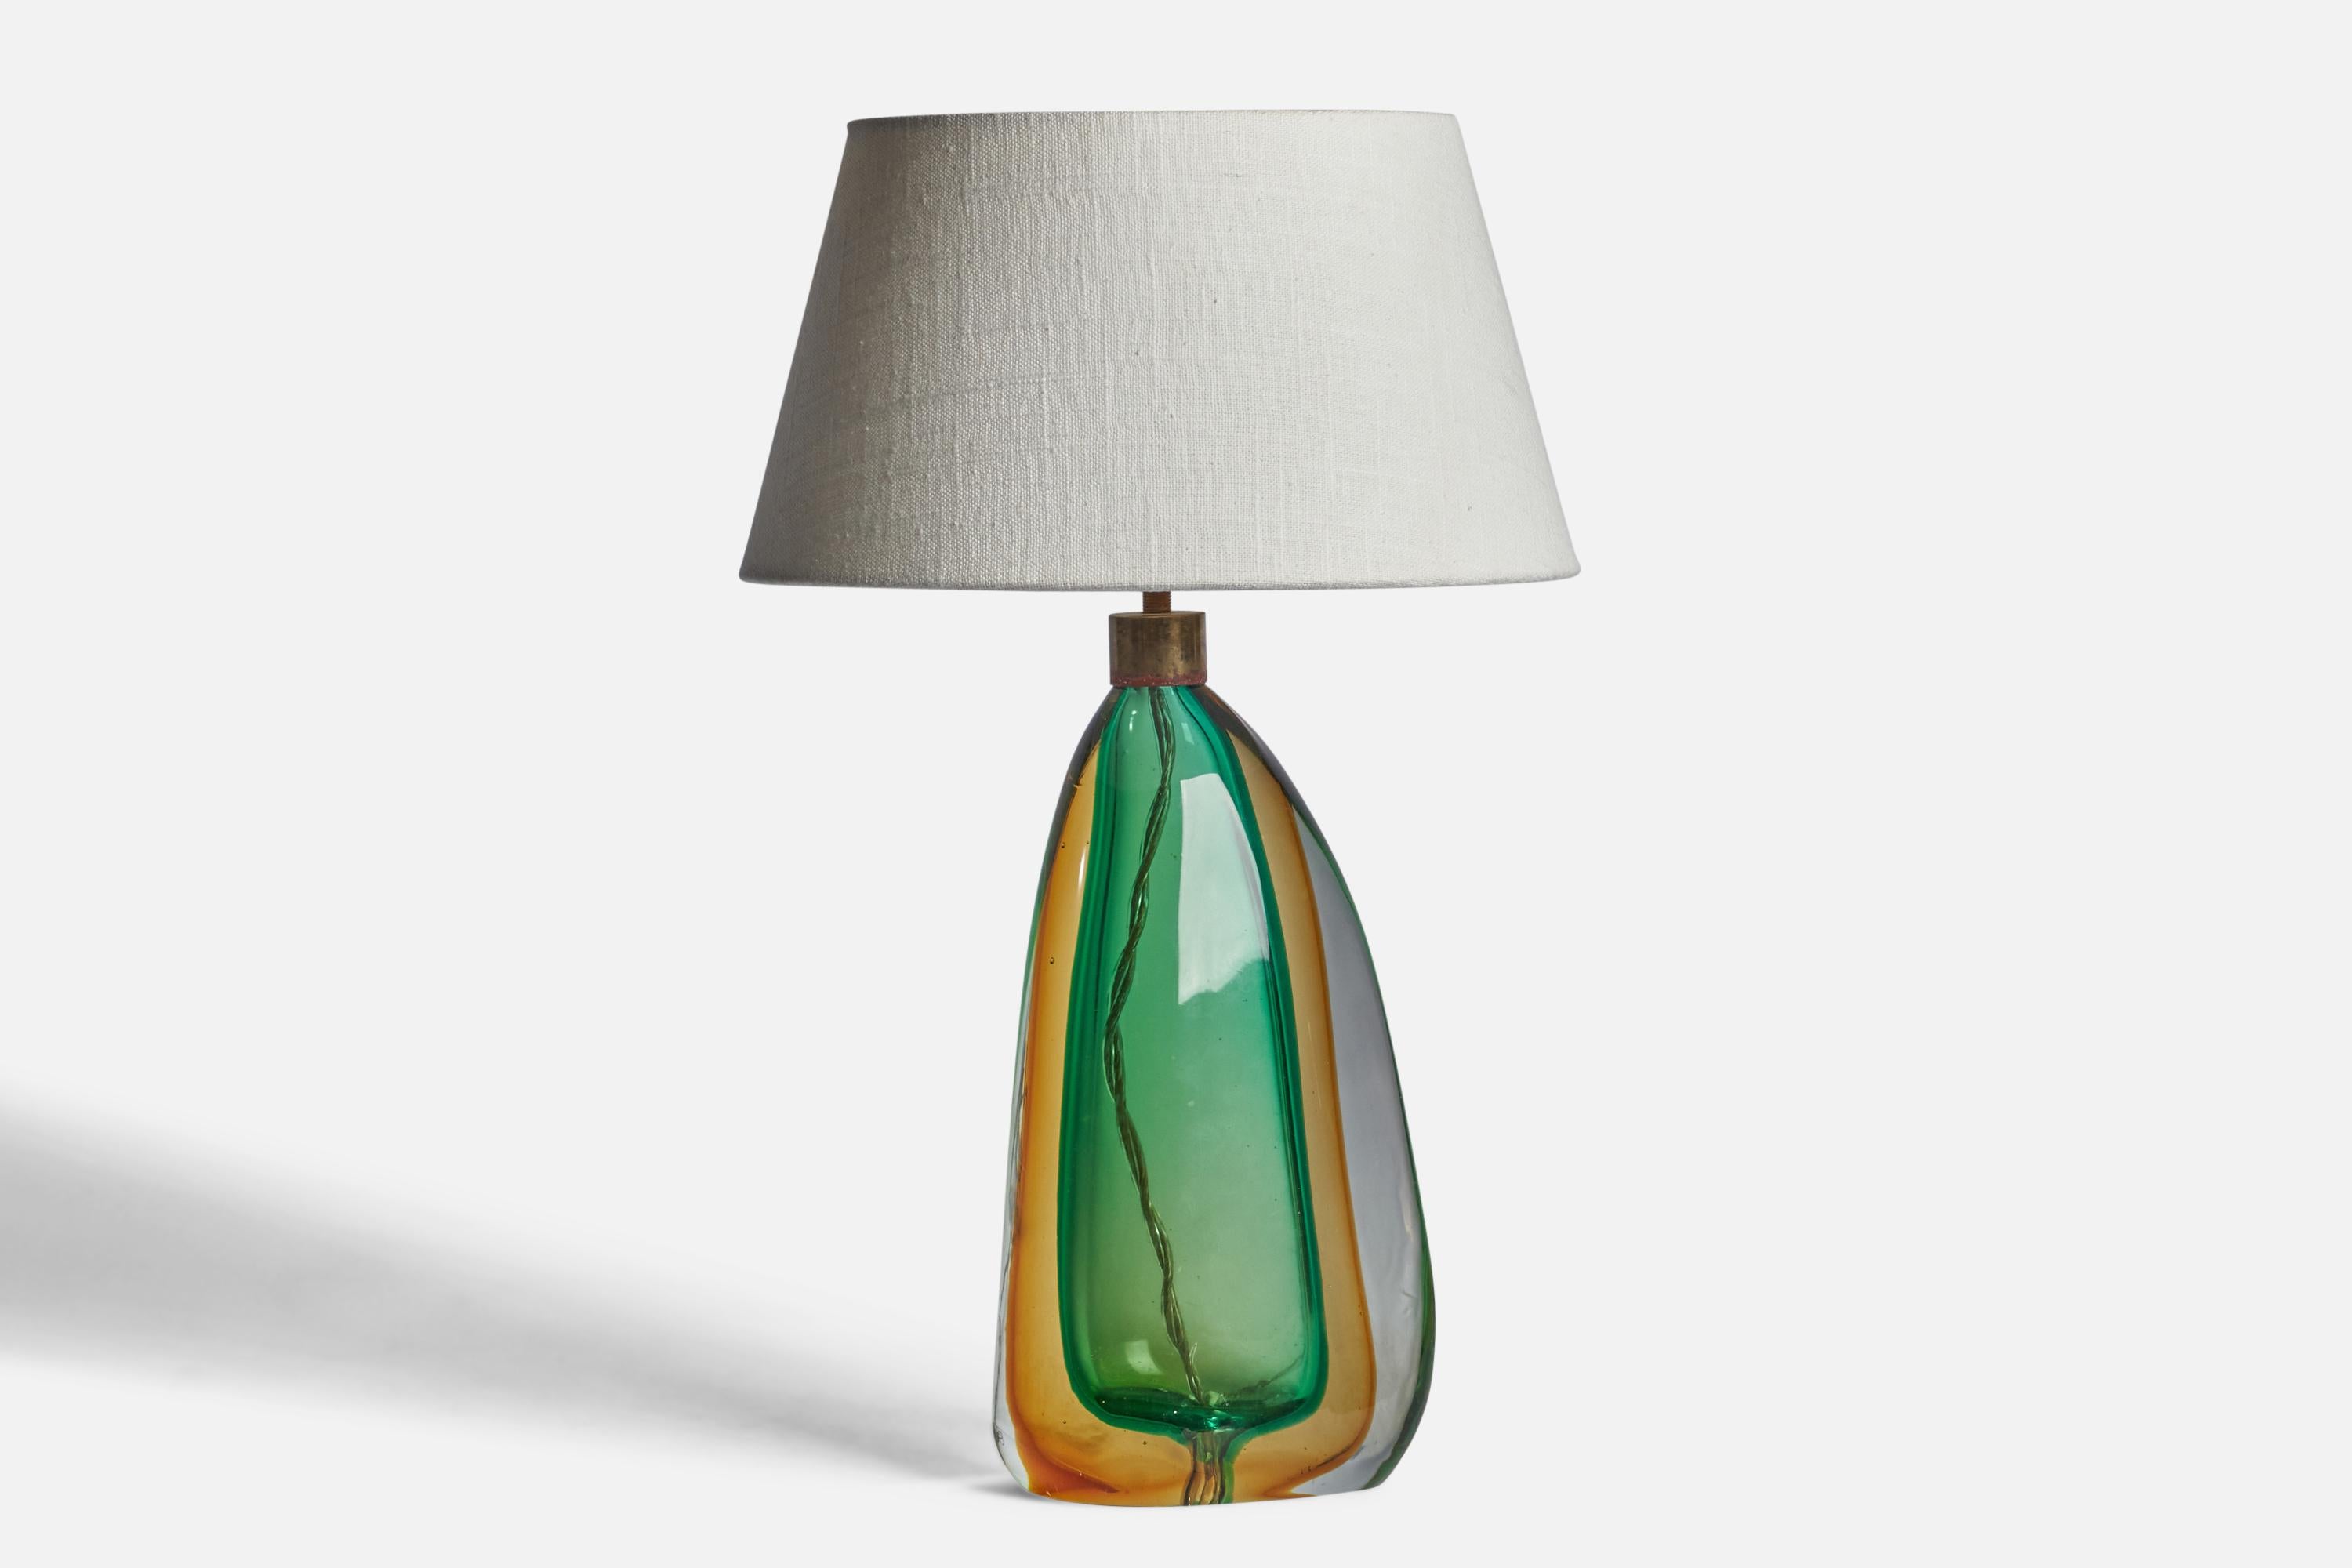 A green and orange-coloured blown glass and brass table lamp designed and produced in Murano, Italy, c. 1940s.

Dimensions of Lamp (inches): 13” H x 5.25” W x 3.75 D
Dimensions of Shade (inches): 7” Top Diameter x 10” Bottom Diameter x